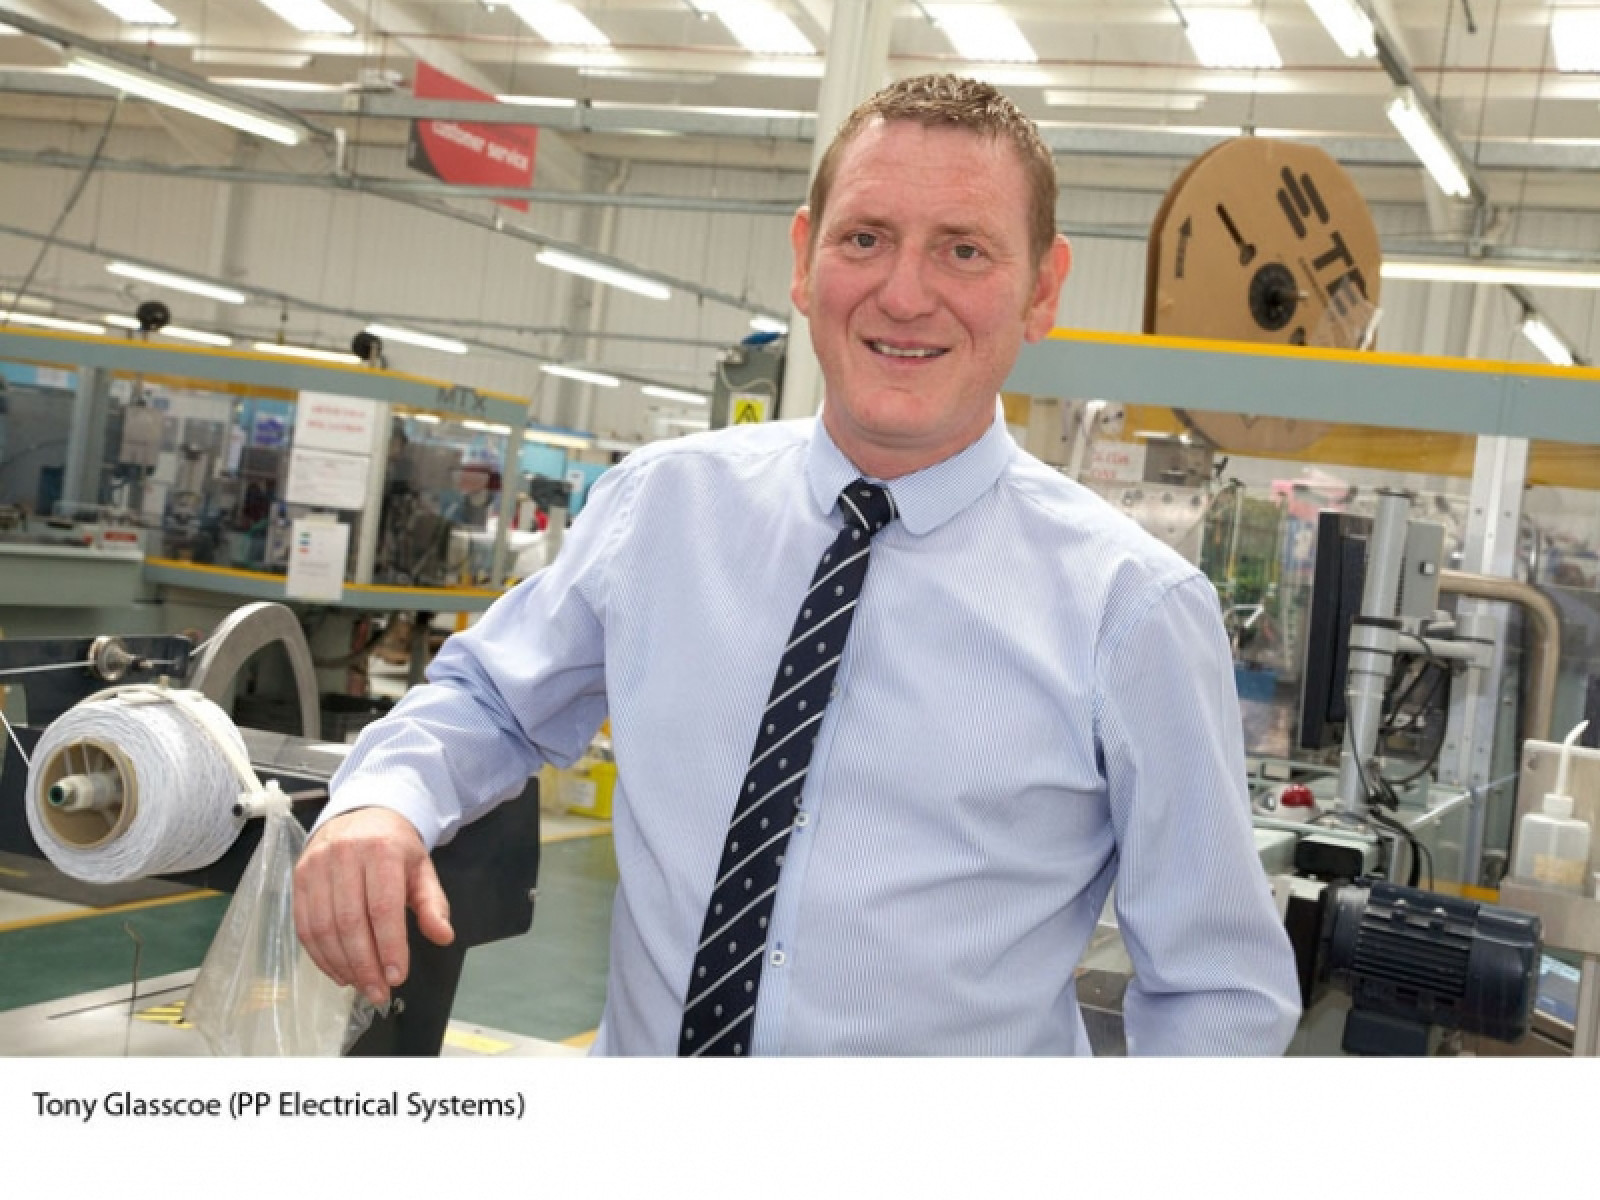 PP Electricals new sales director targets £50m tu...